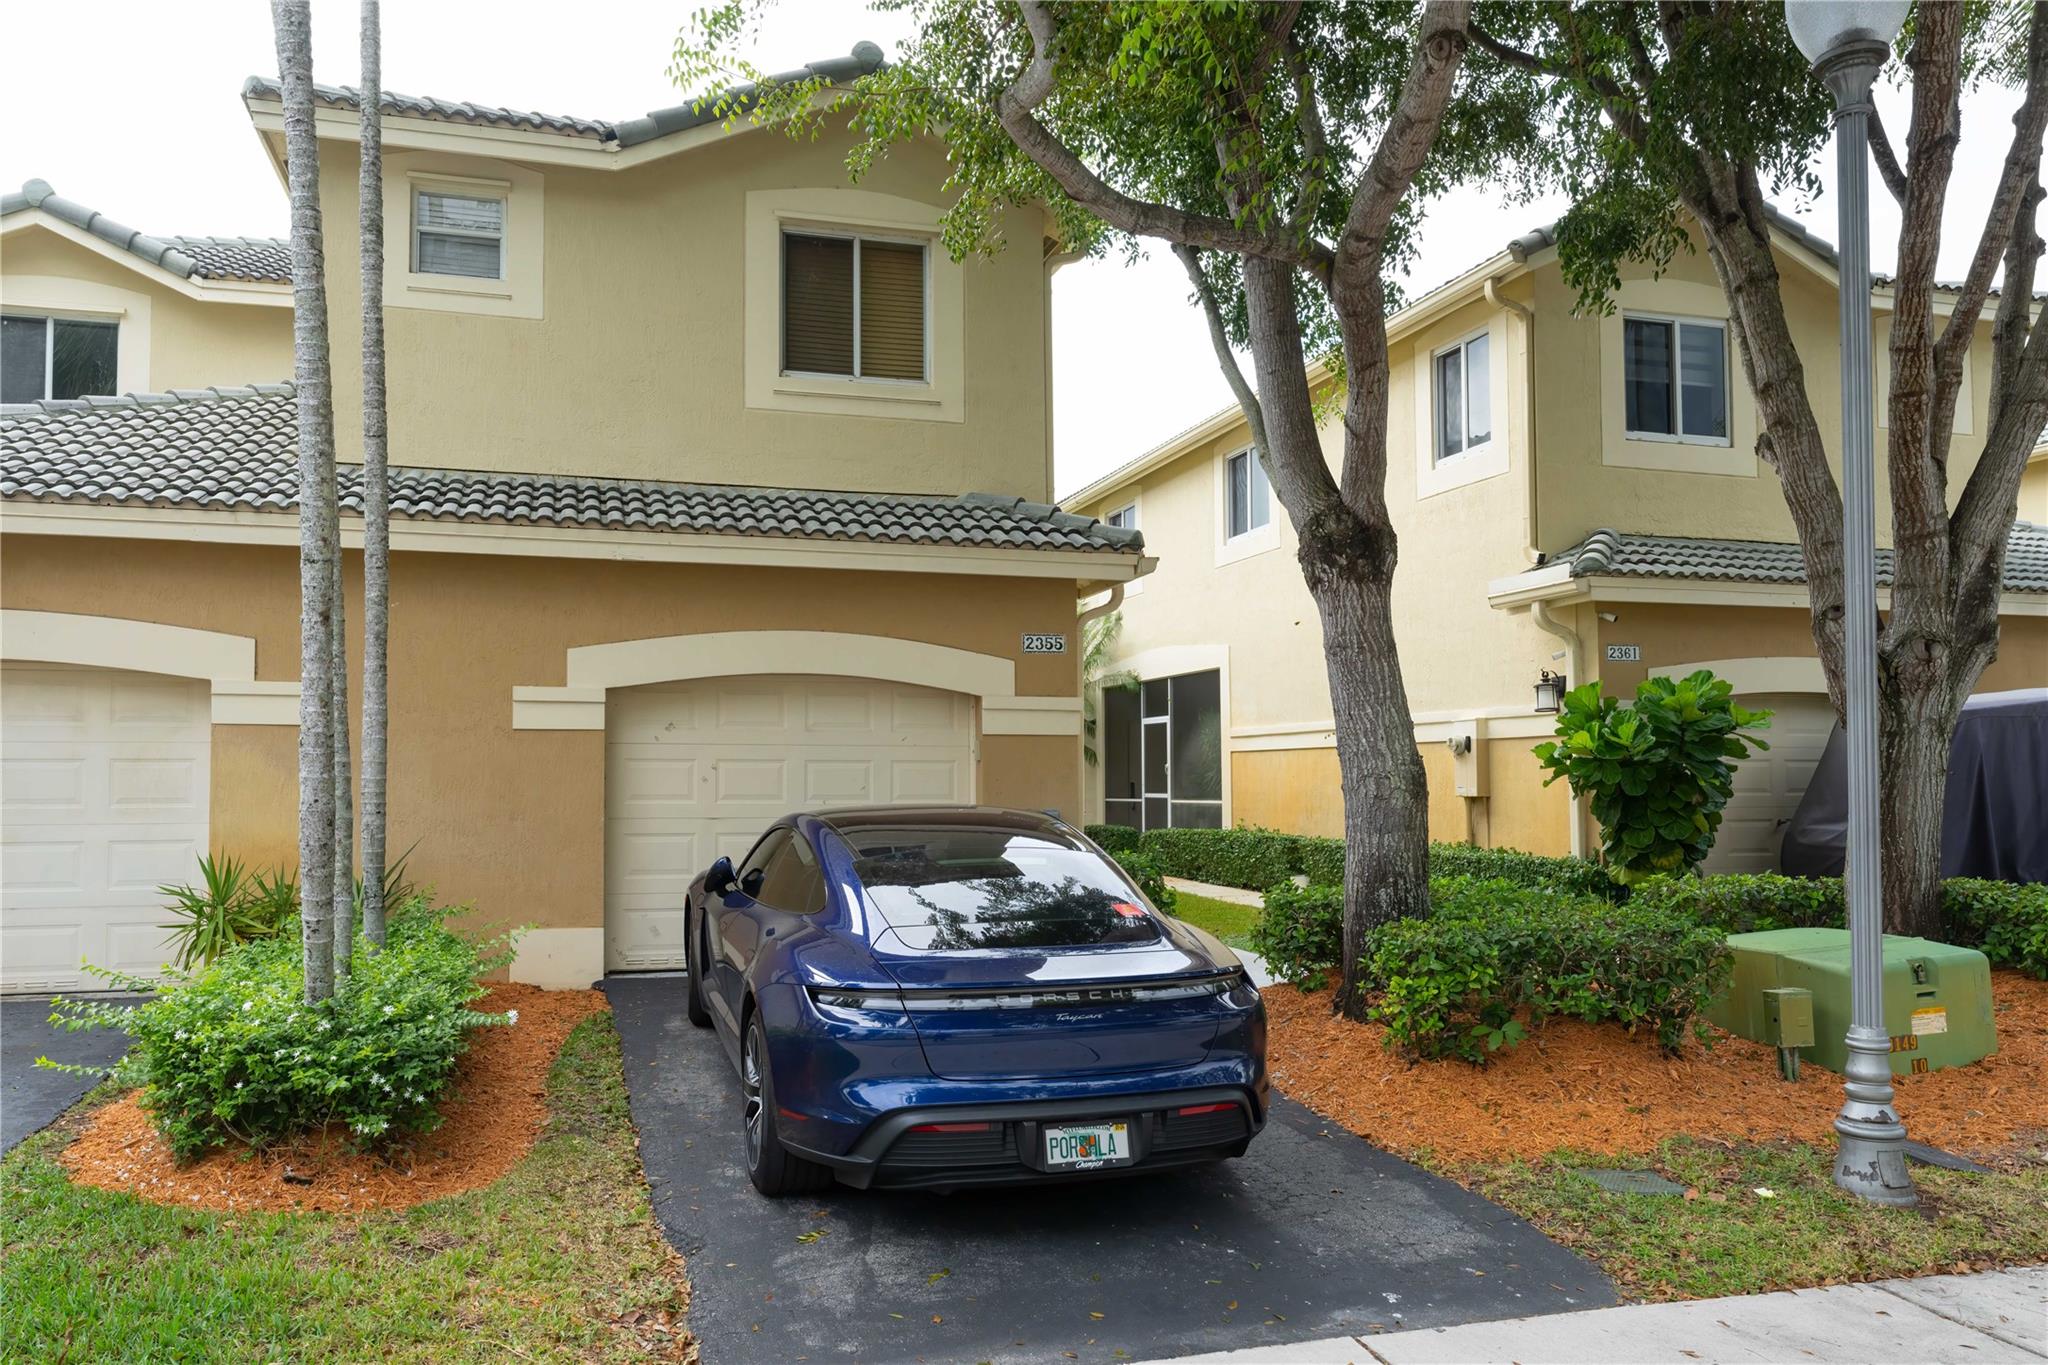 RELAXING UNIT ON THE MARKET FOR RENT IN THE BEAUTIFUL SAN MATEO GATED COMMUNITY IN WESTON - FLORIDA USA. CORNER UNIT 4/2.5 WITH A ONE-CAR GARAGE. LAMINATE FLOOR THROUGHOUT COMMON AREAS DOWNSTAIRS, STAIRS AND BEDROOMS. LARGE MASTER BATHROOM WITH SEPARATED ROMAN TUB AND SHOWER. BEAUTIFUL KITCHEN WALKING DISTANCE TO ELEMENTARY SCHOOL. EASY ACCESS TO I-75 AND I-595. SMALL PETS ARE WELCOME!!!!